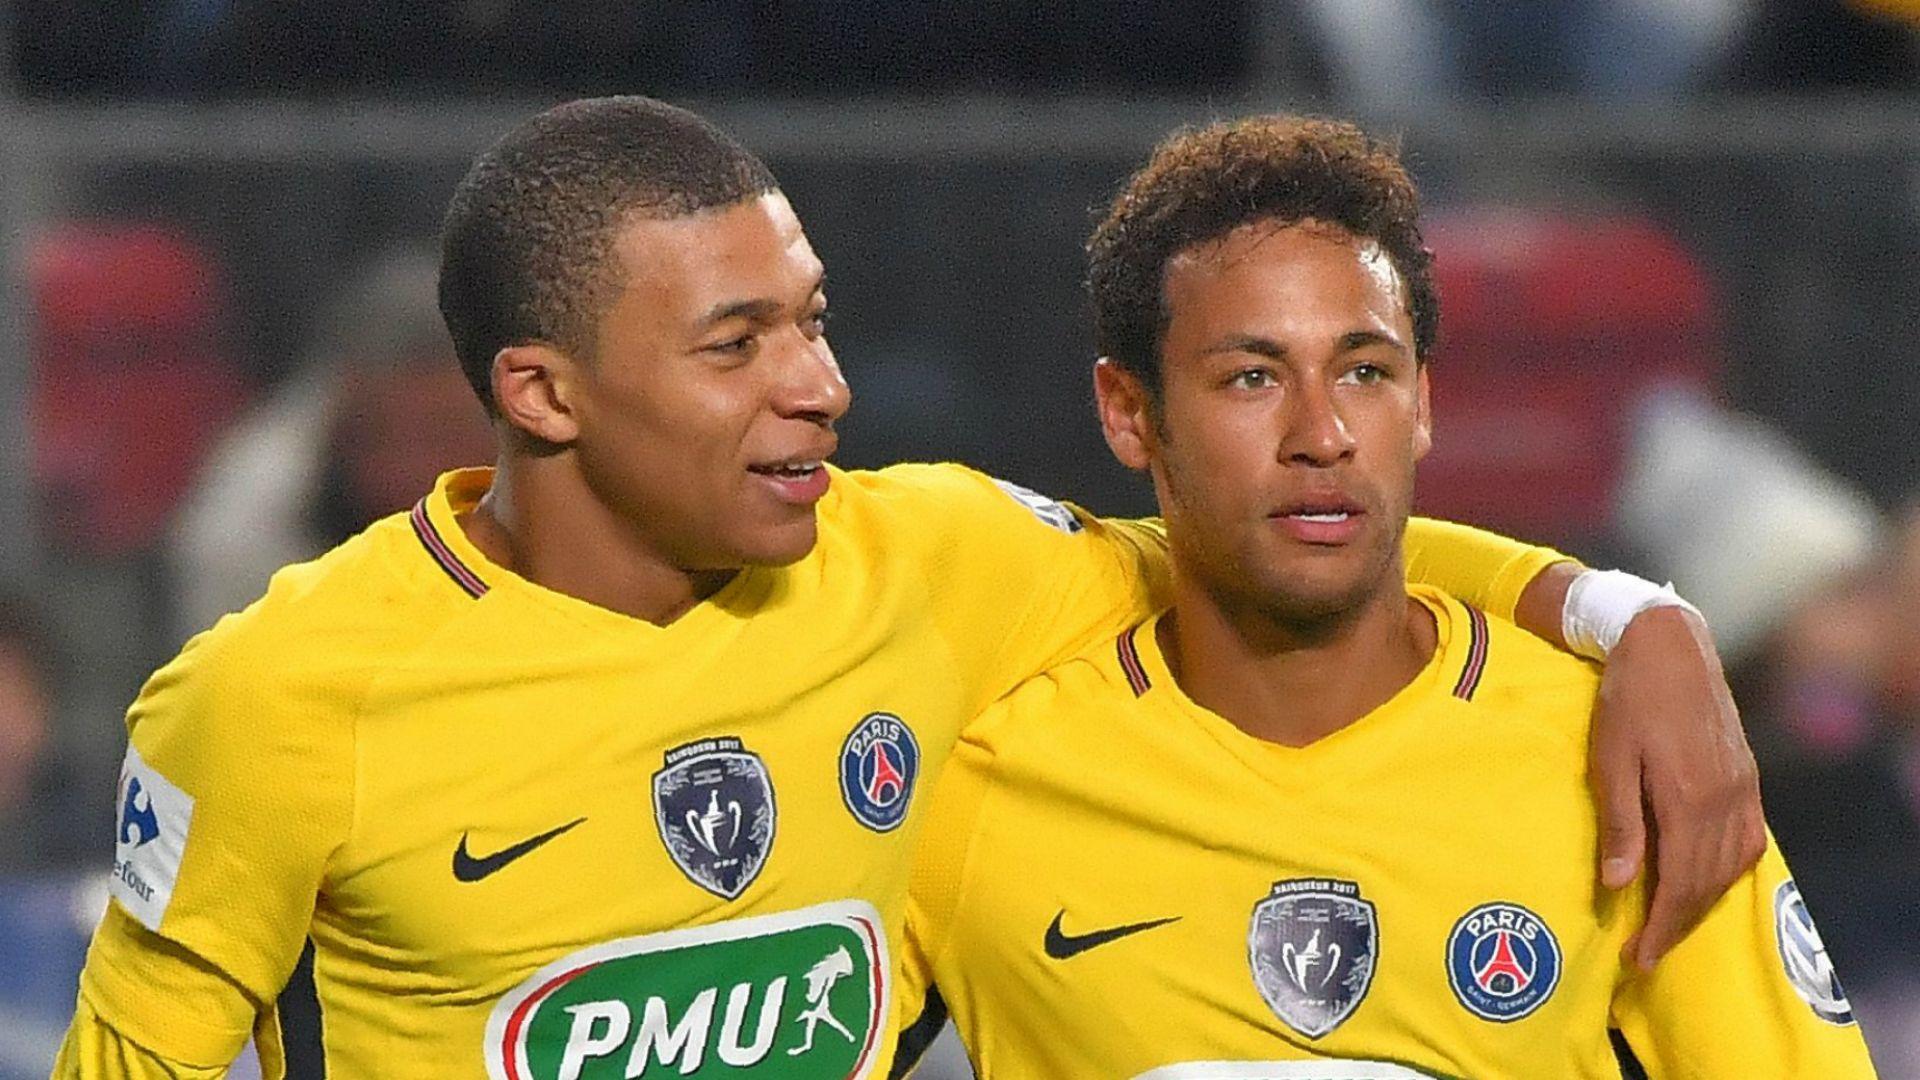 Neymar to Real Madrid links nothing but hot air, insists Mbappe